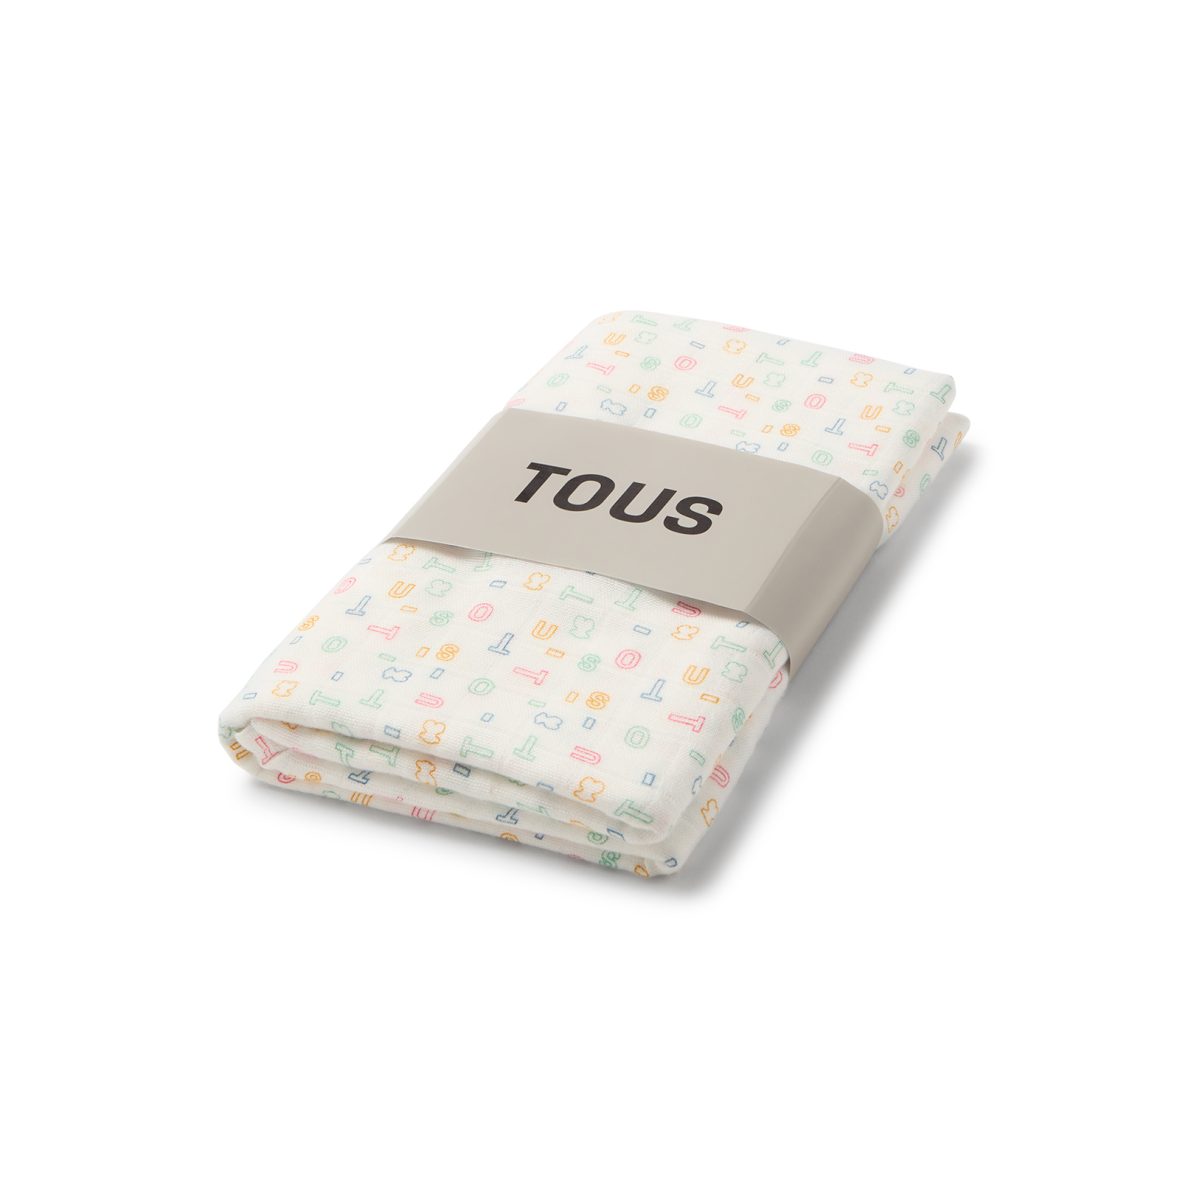 Tous muselina In multicolor